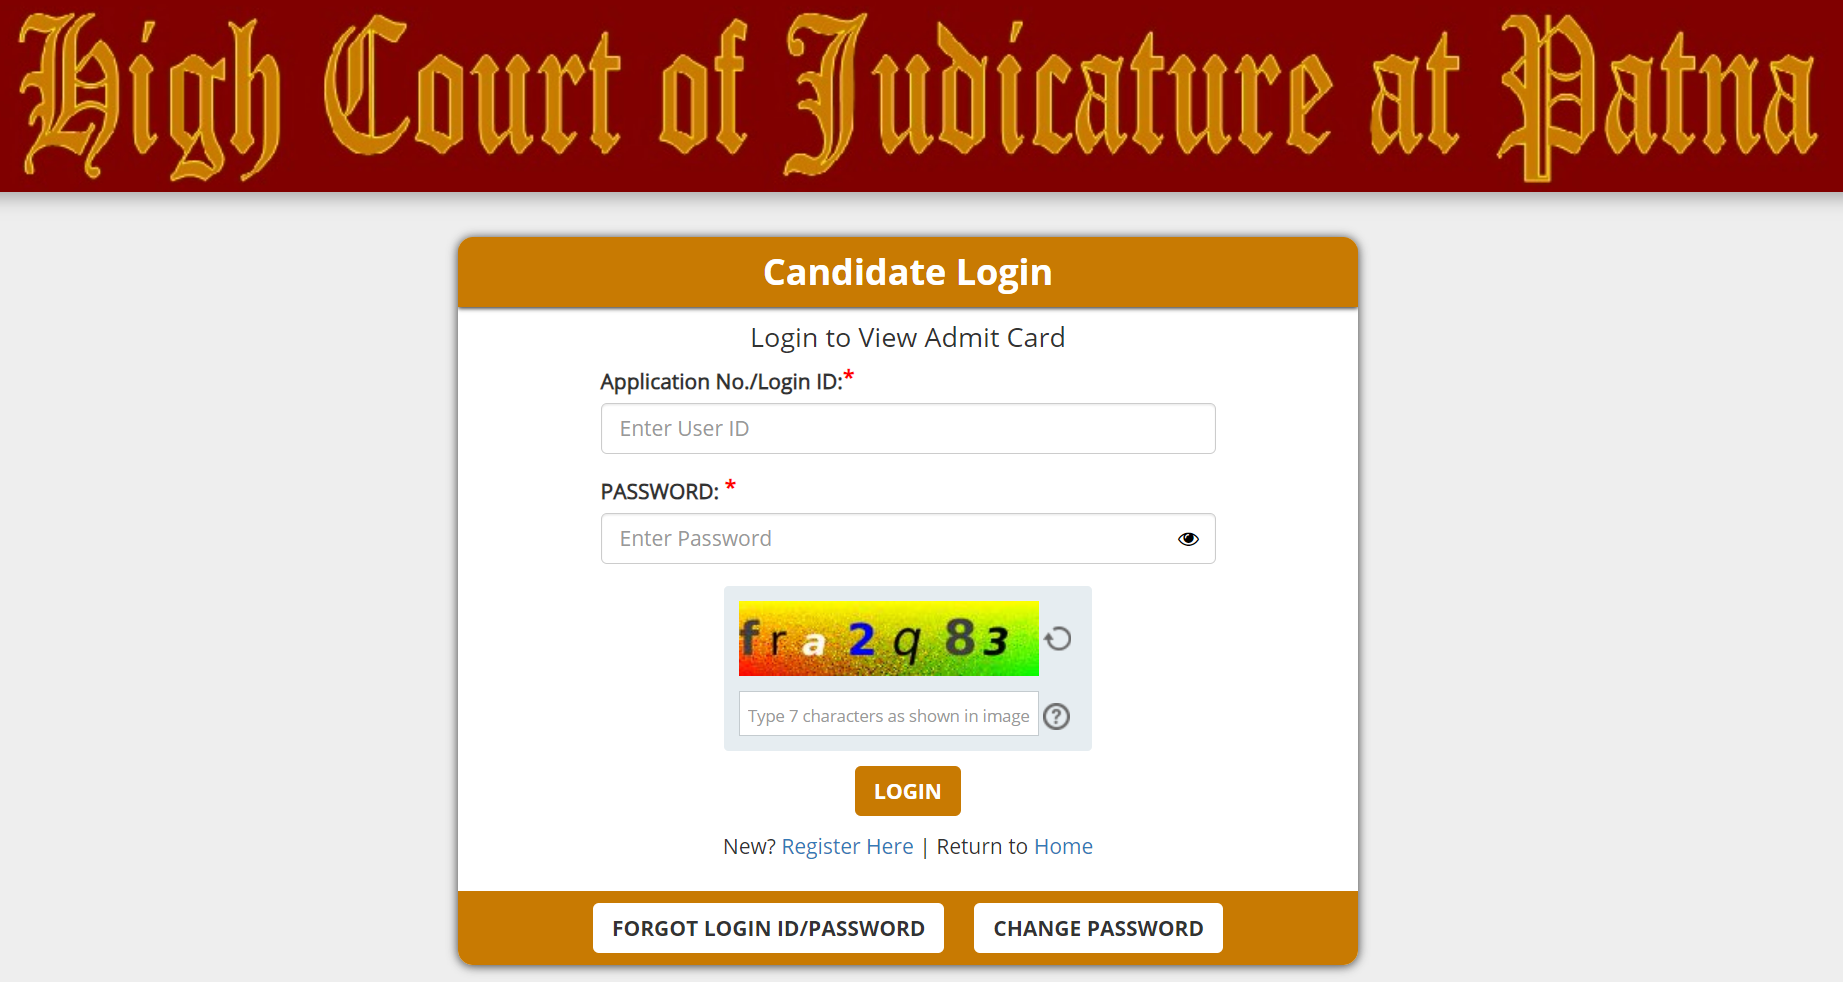 Patna HC Personal Assistant Admit Card